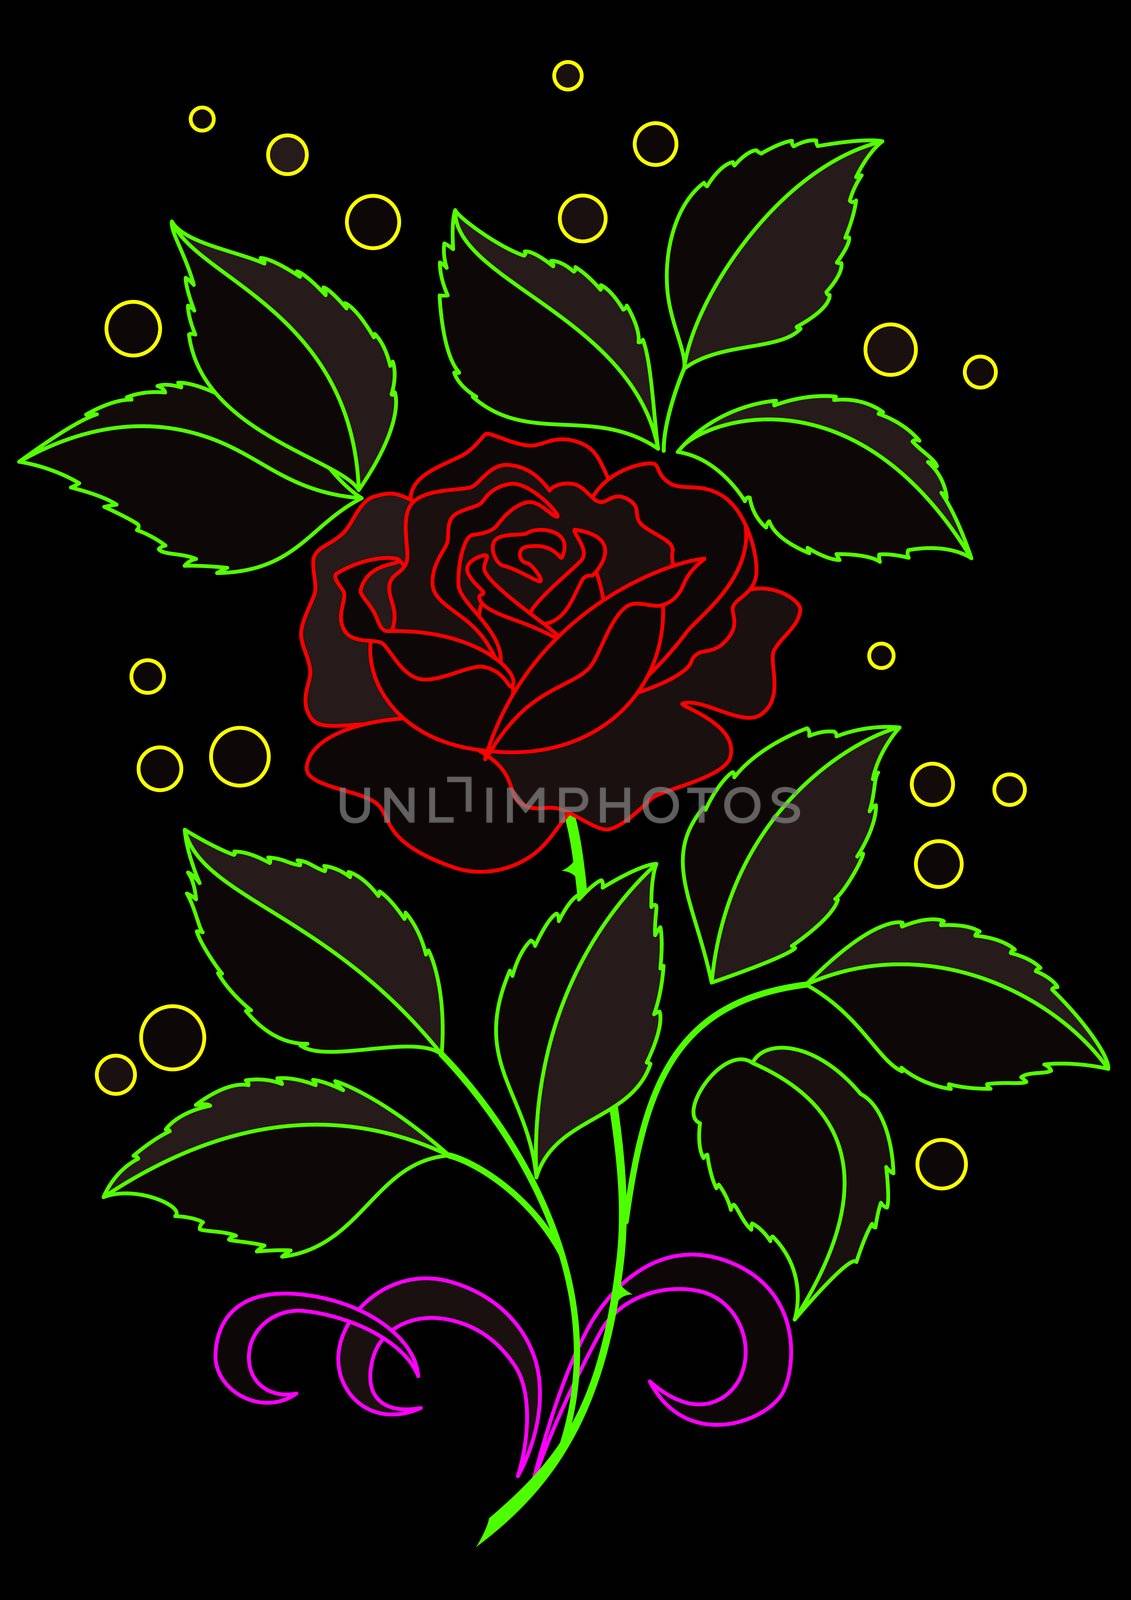 Flower rose with leaves and confetti. Colored silhouettes on black background